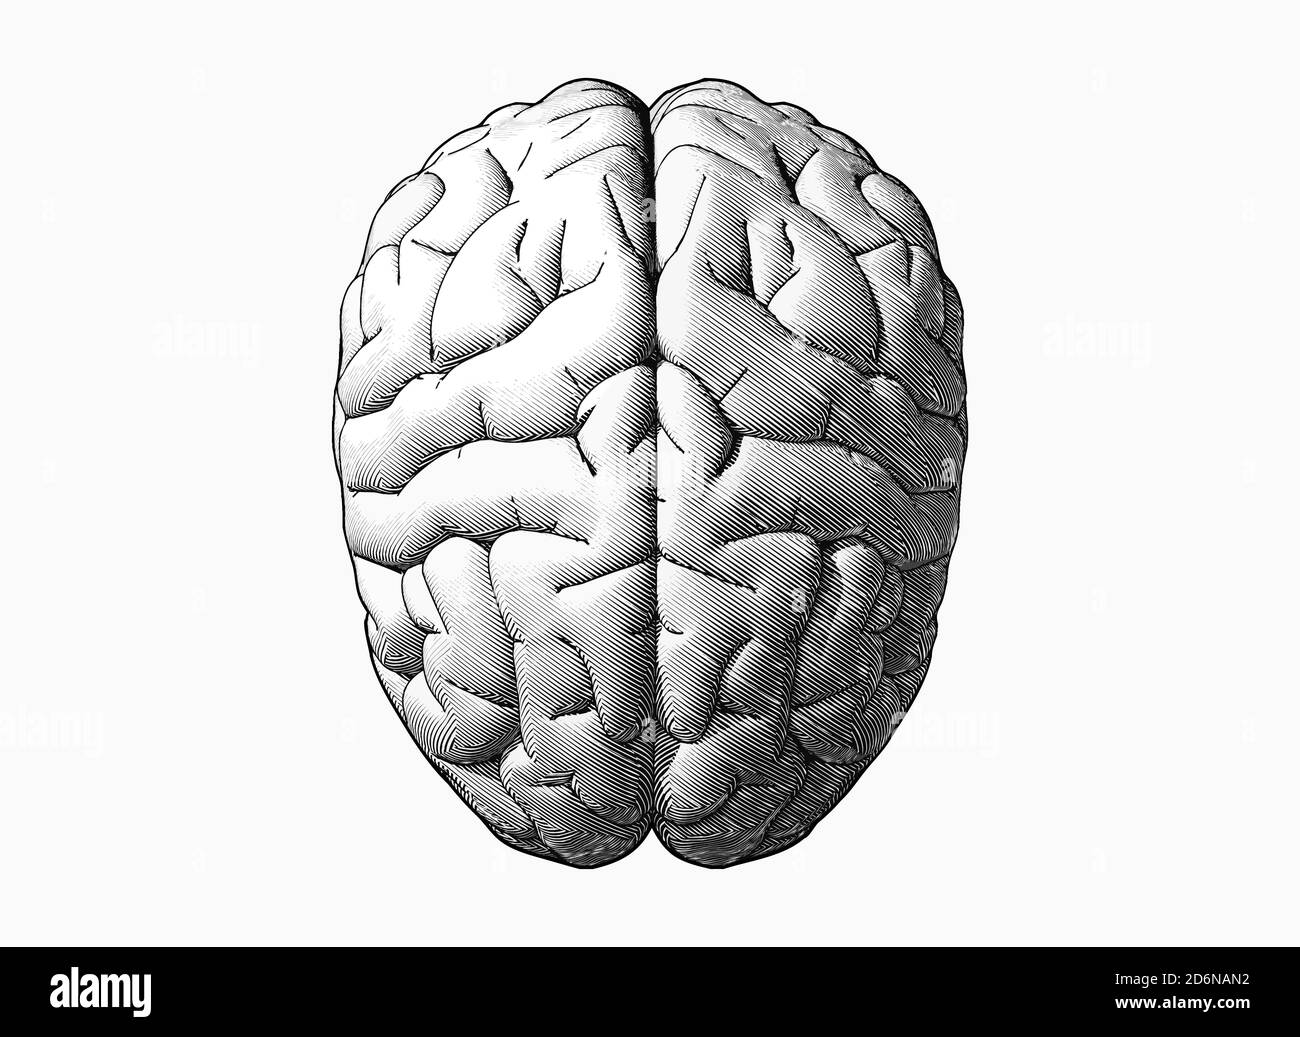 Engraving top view brain in monochrome color isolated on white background Stock Photo